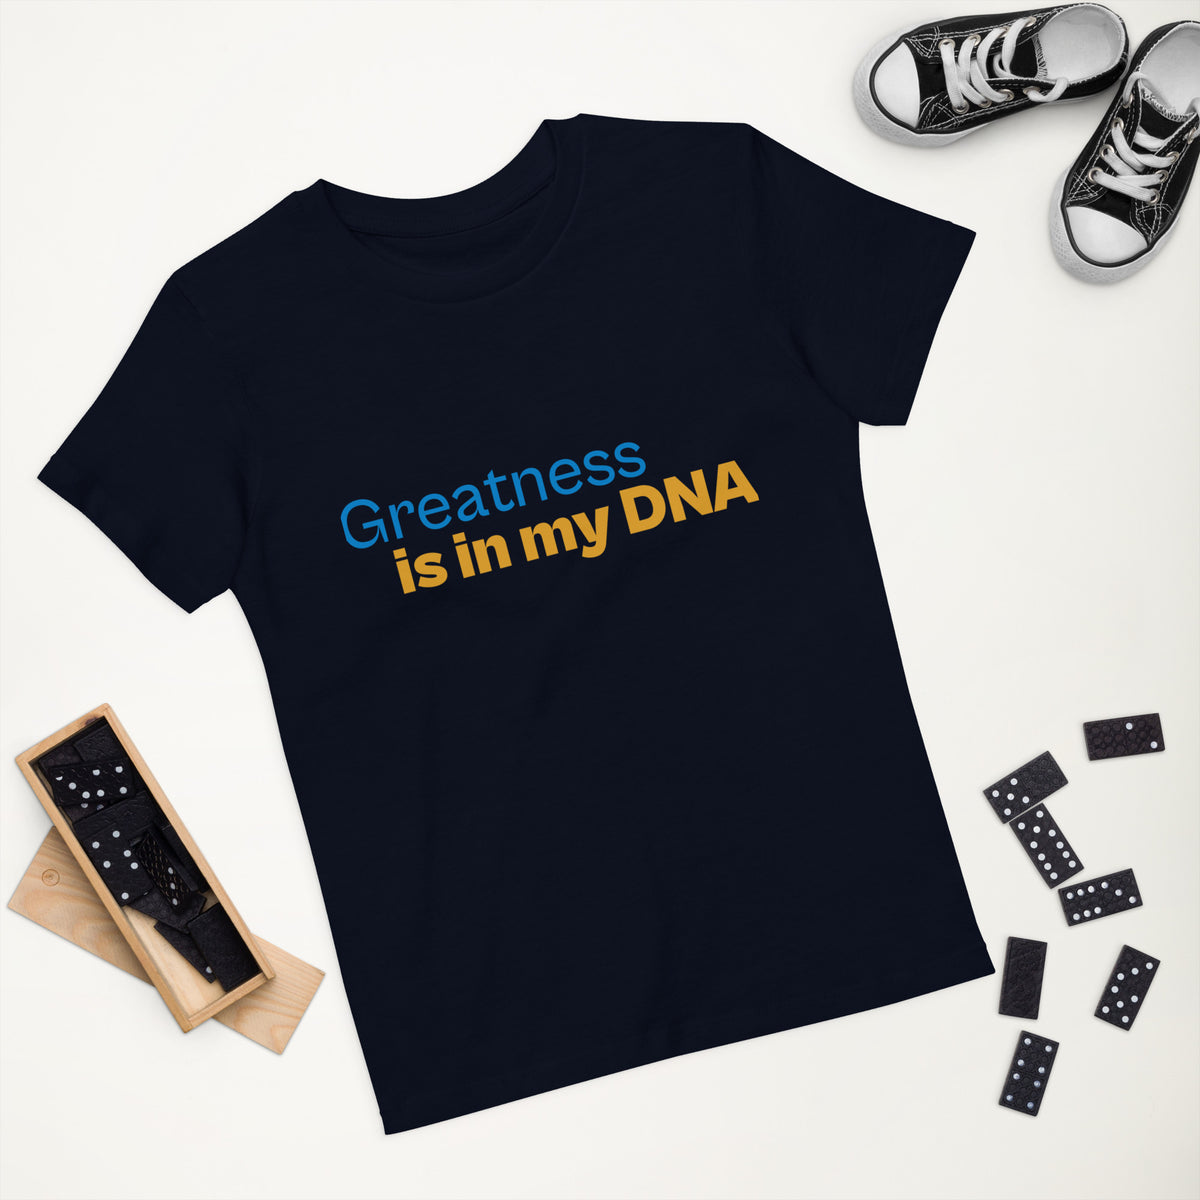 Organic cotton kids t-shirt-Greatness is in my DNA